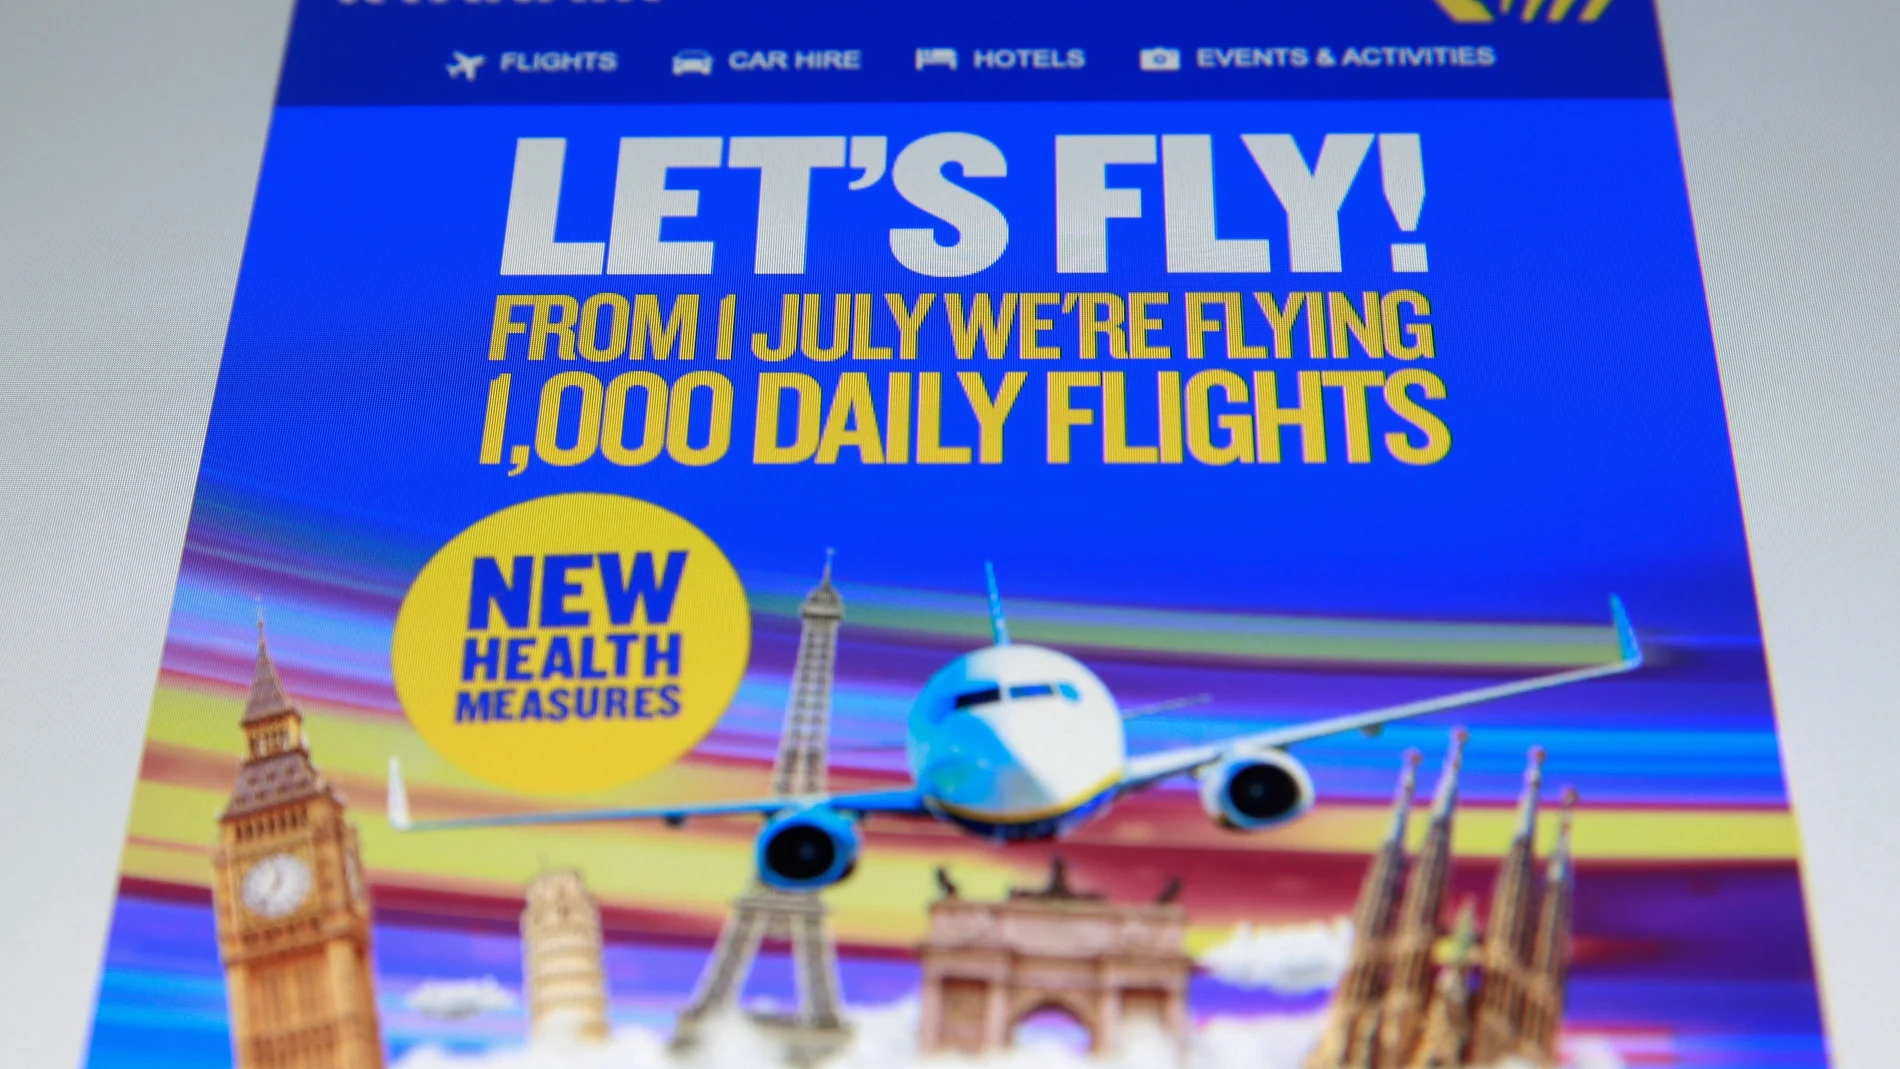 FILE PHOTO: An online advertisement for Ryanair, Europe's largest low-cost airline, states they are flying 1,000 daily flights from July 1 with new health measures, seen on a screen in London